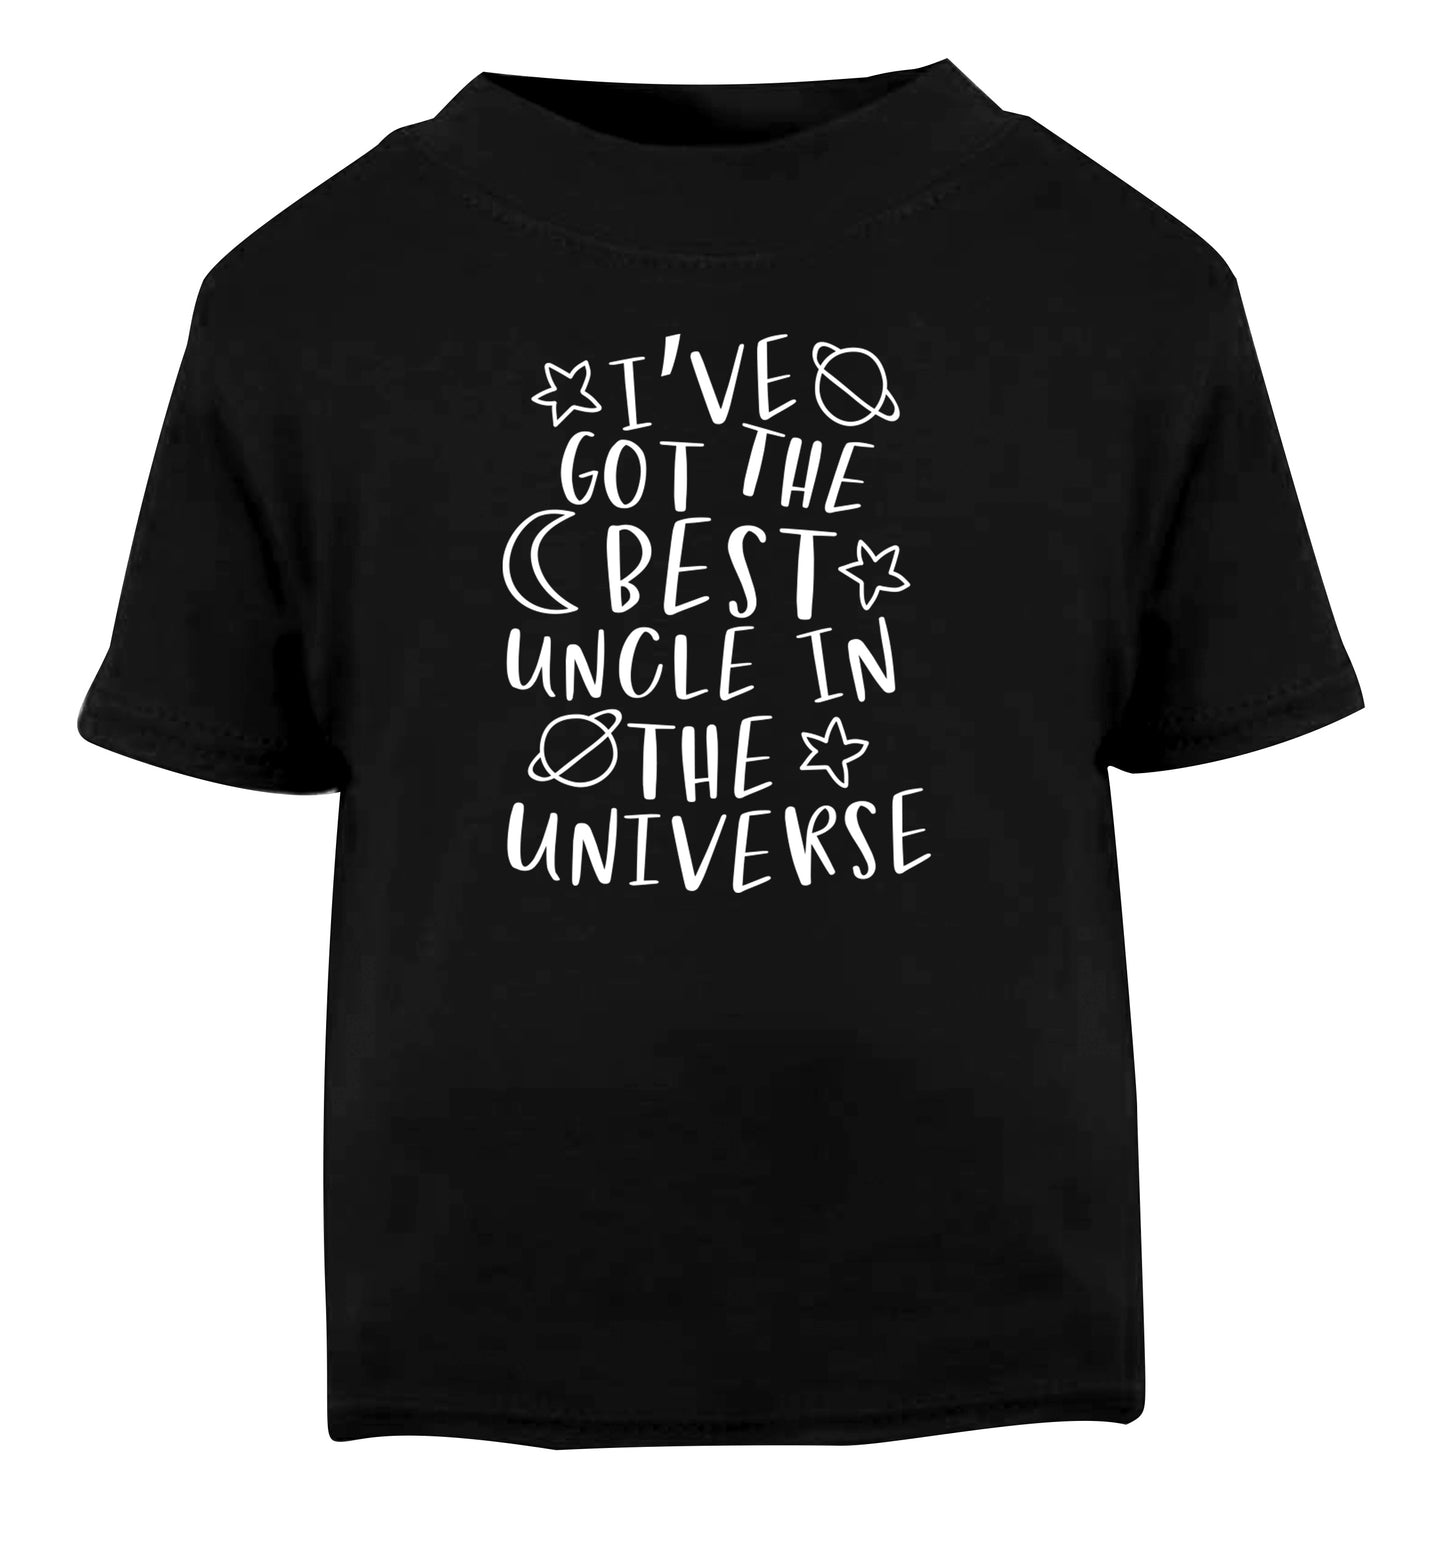 I've got the best uncle in the universe Black Baby Toddler Tshirt 2 years